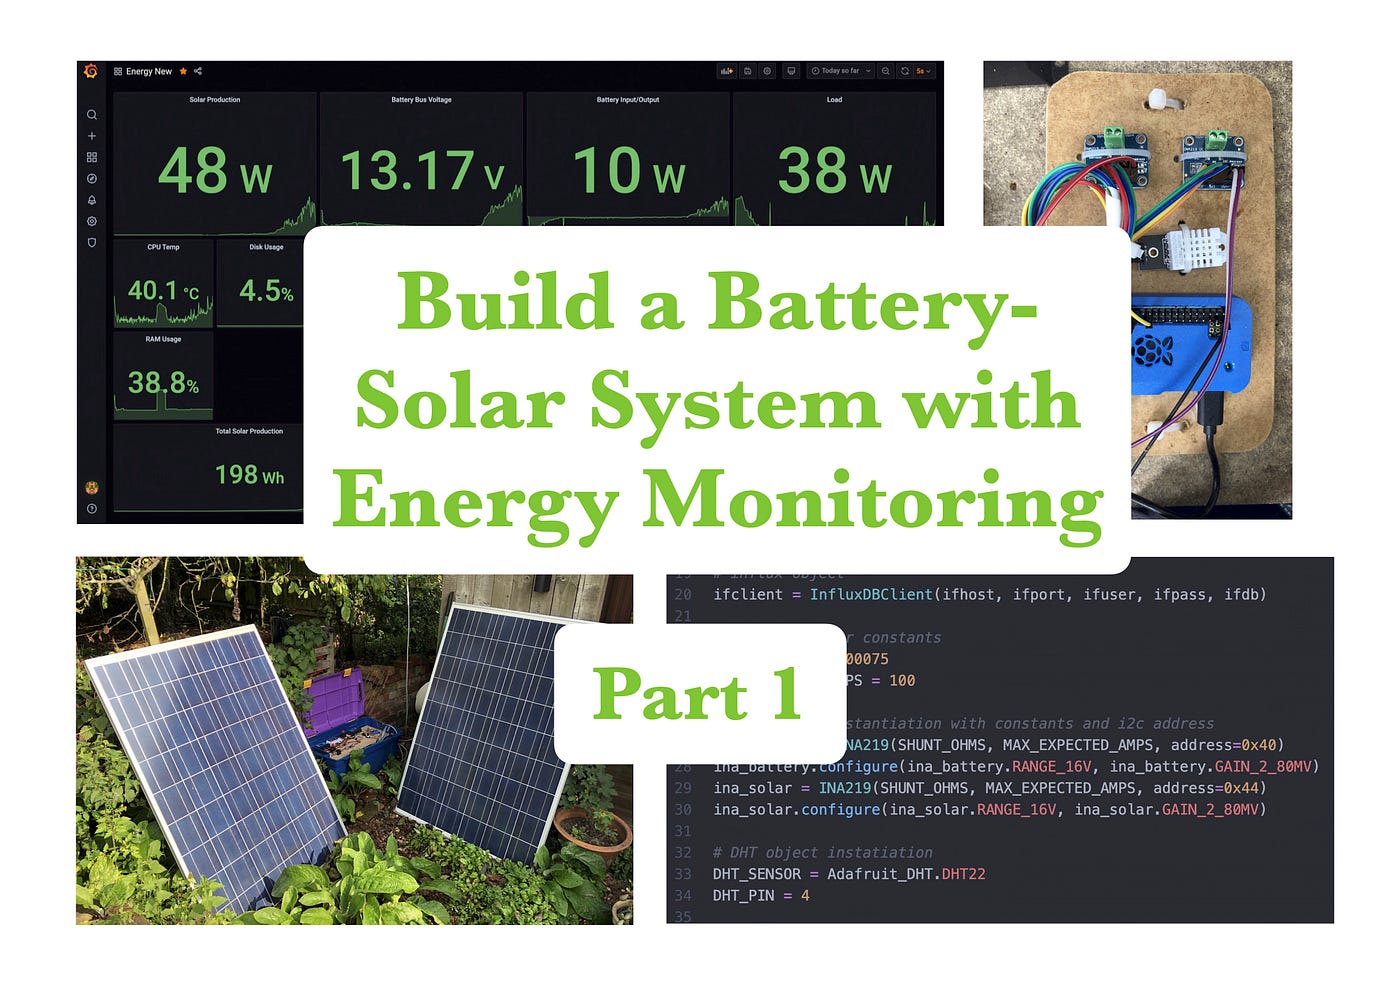 Affordable battery-solar with energy monitoring P1 | Geek Culture